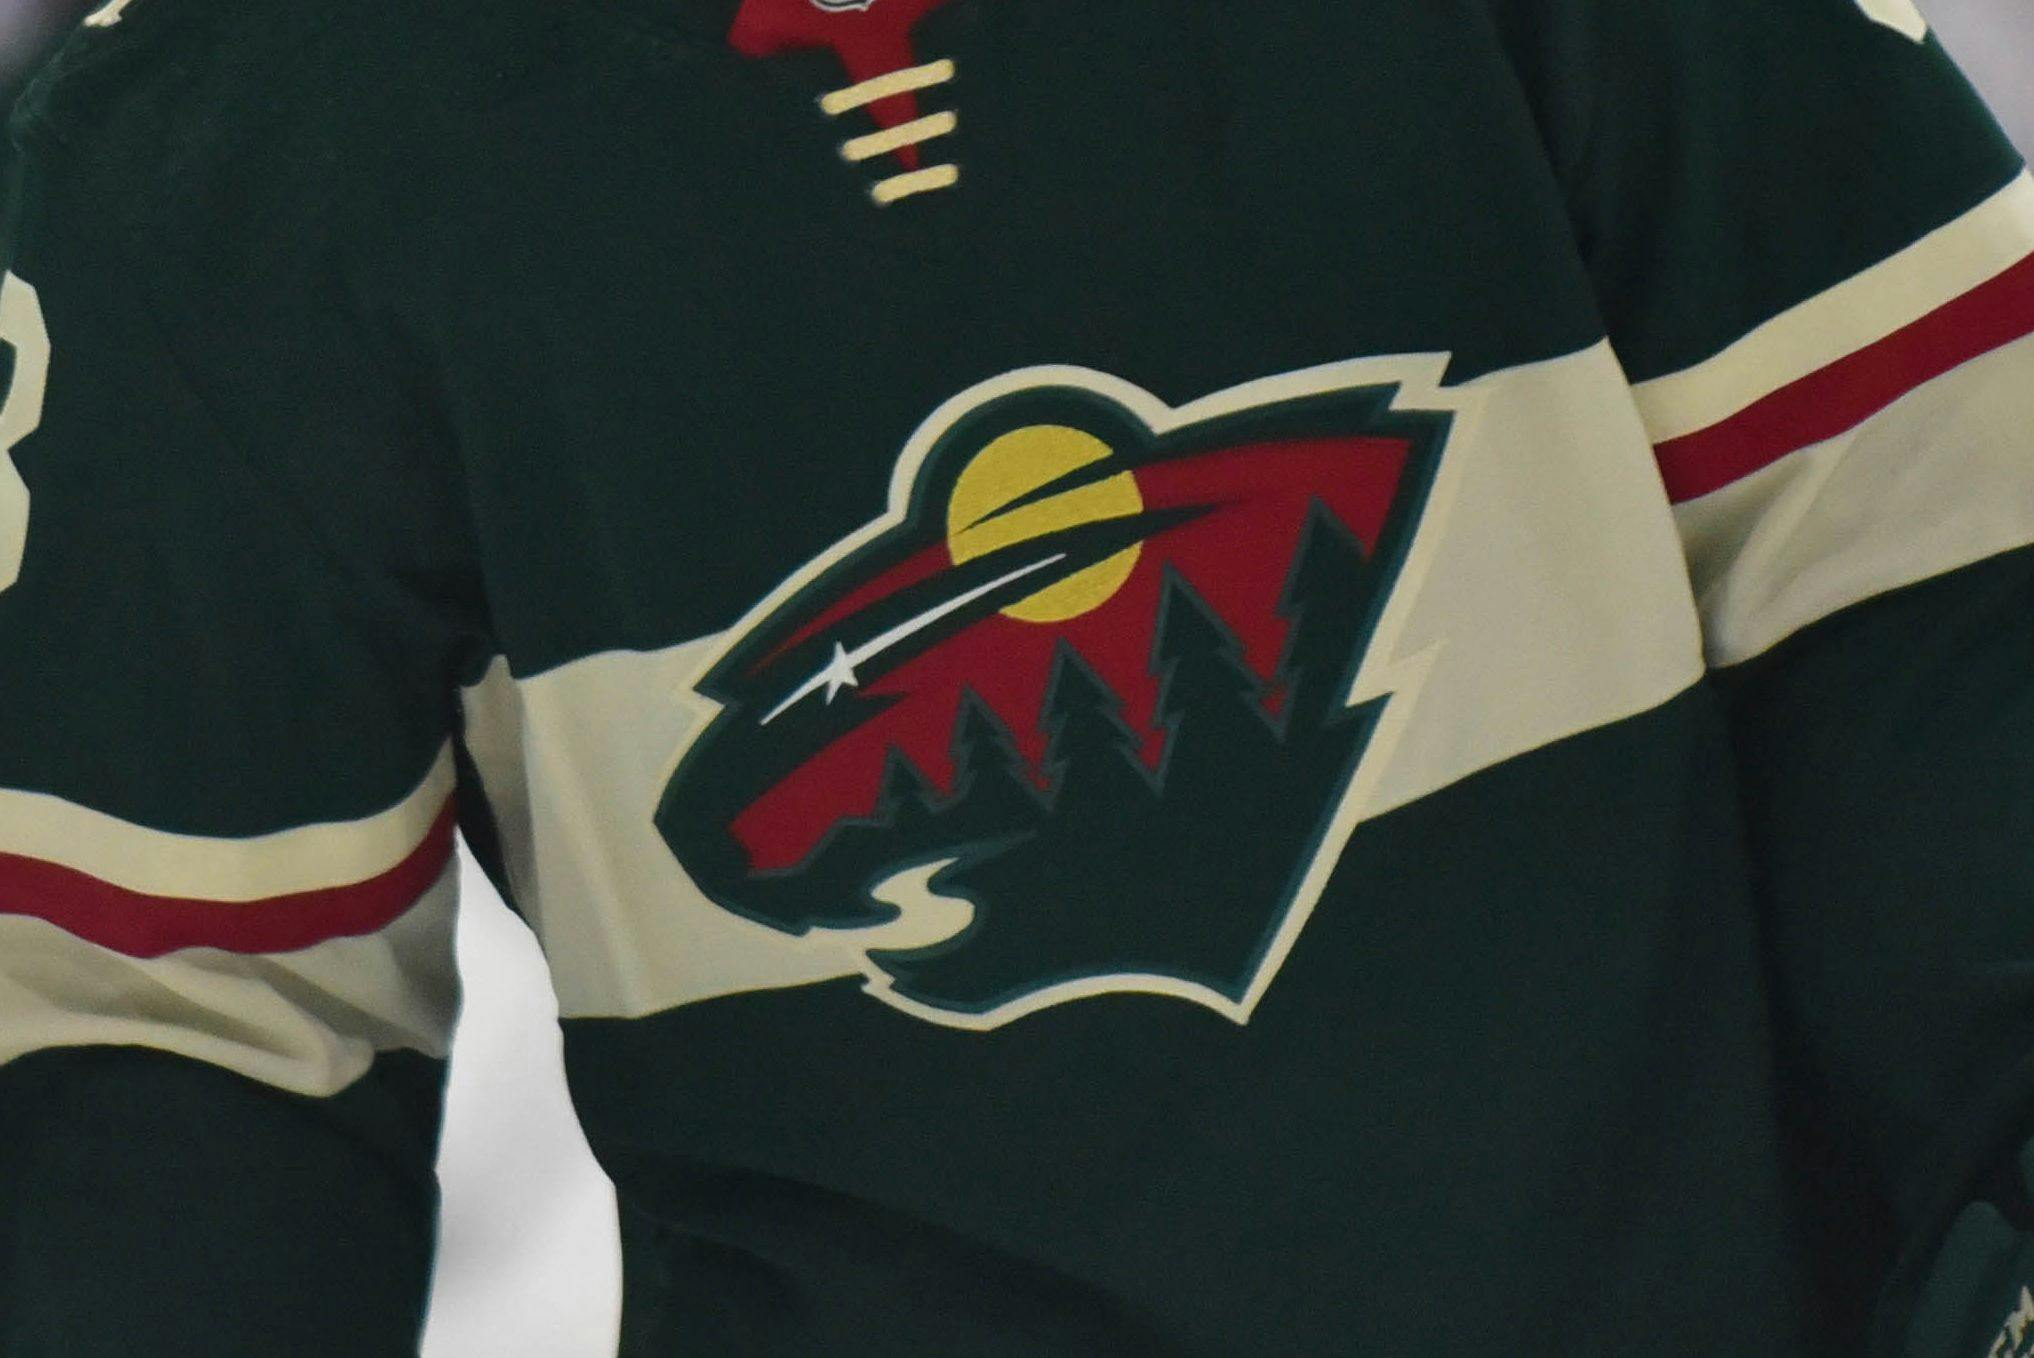 Minnesota Wild, assistant GM Chris O’Hearn ‘mutually agree to part ways’